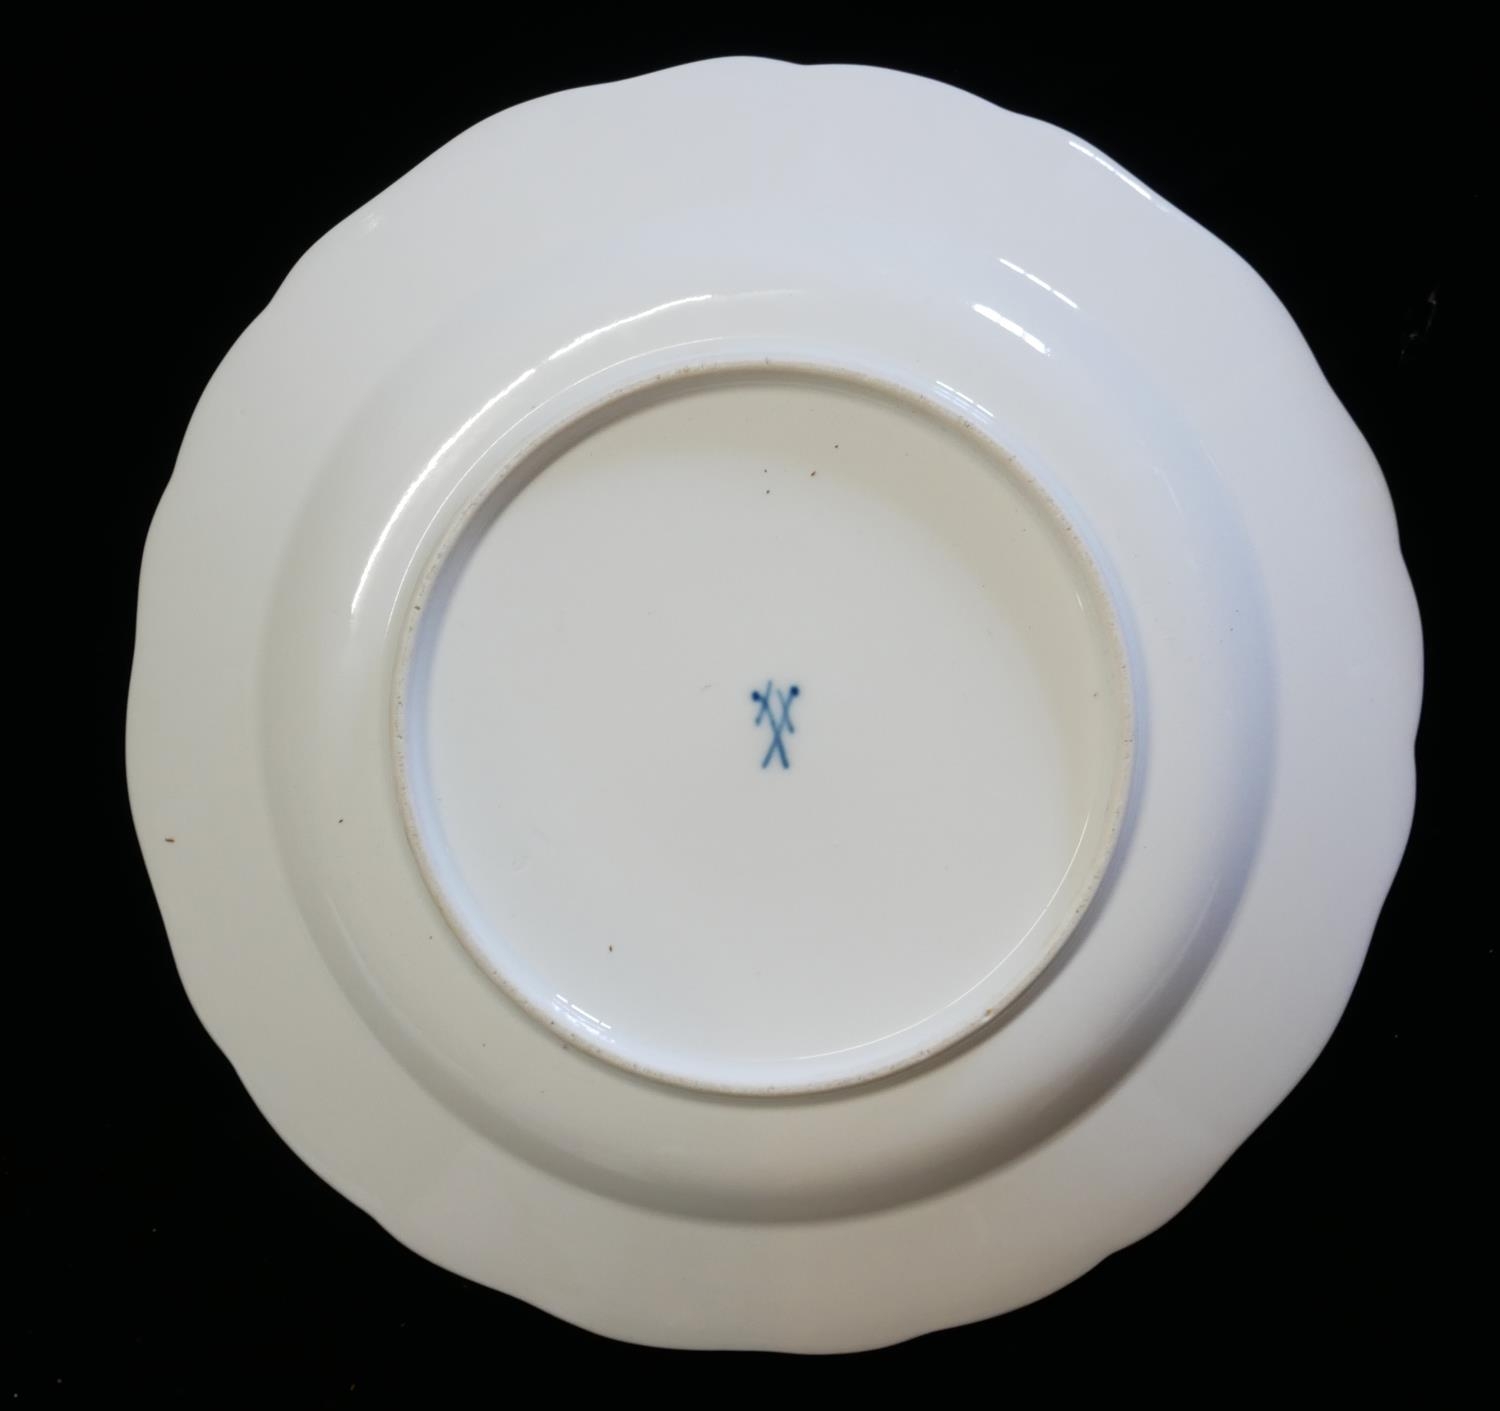 MESSIEN, A SET OF SIX EARLY 20TH CENTURY PORCELAIN DINNER PLATES AND MATCHING SERVING BOWL Having - Image 8 of 11